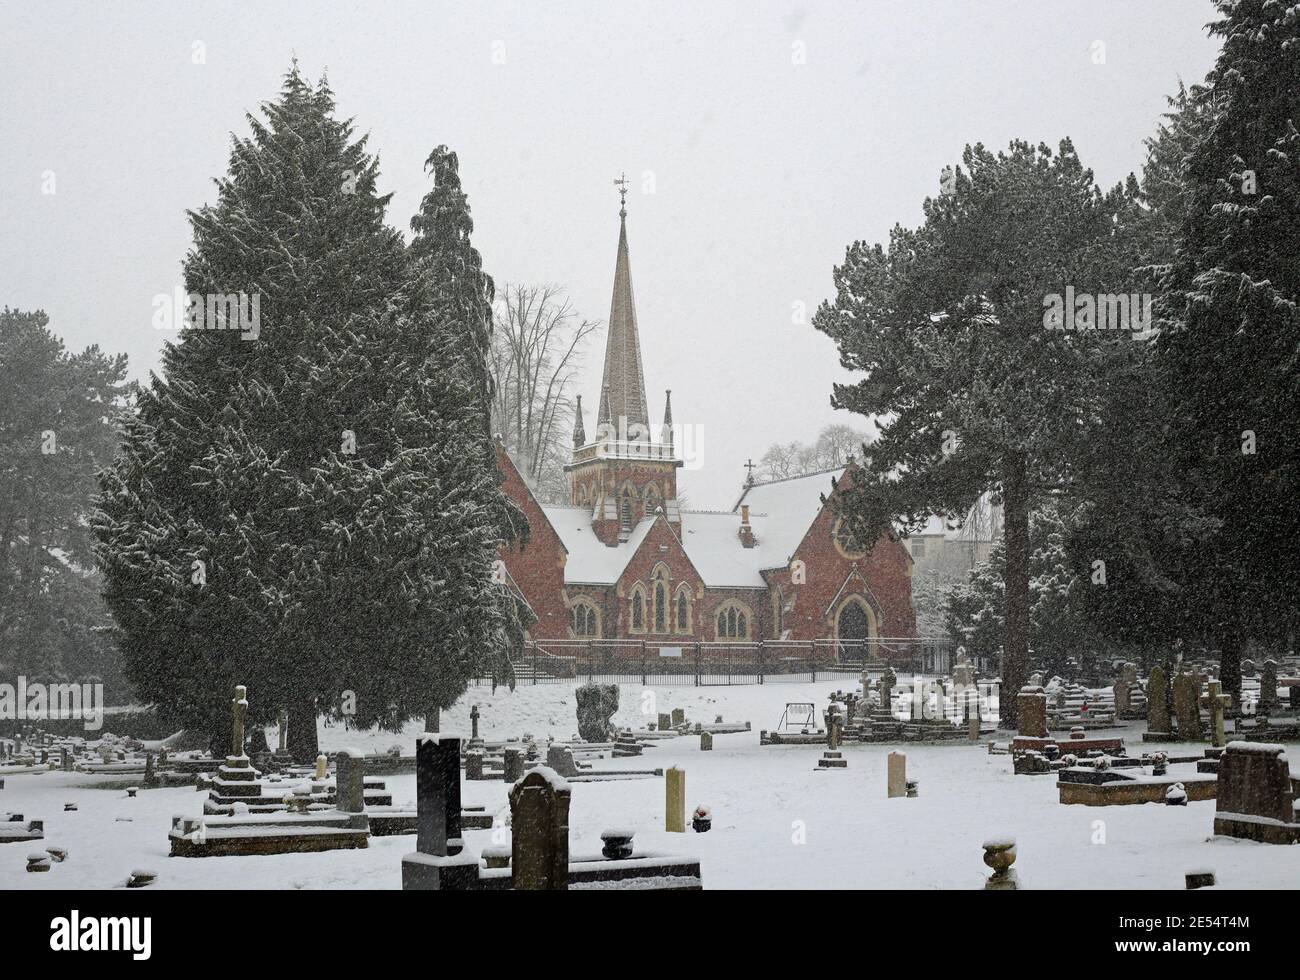 The Thomas Robinson building in Stourbridge (Lye and Wollescote) cemetery during a snowstorm. Stock Photo